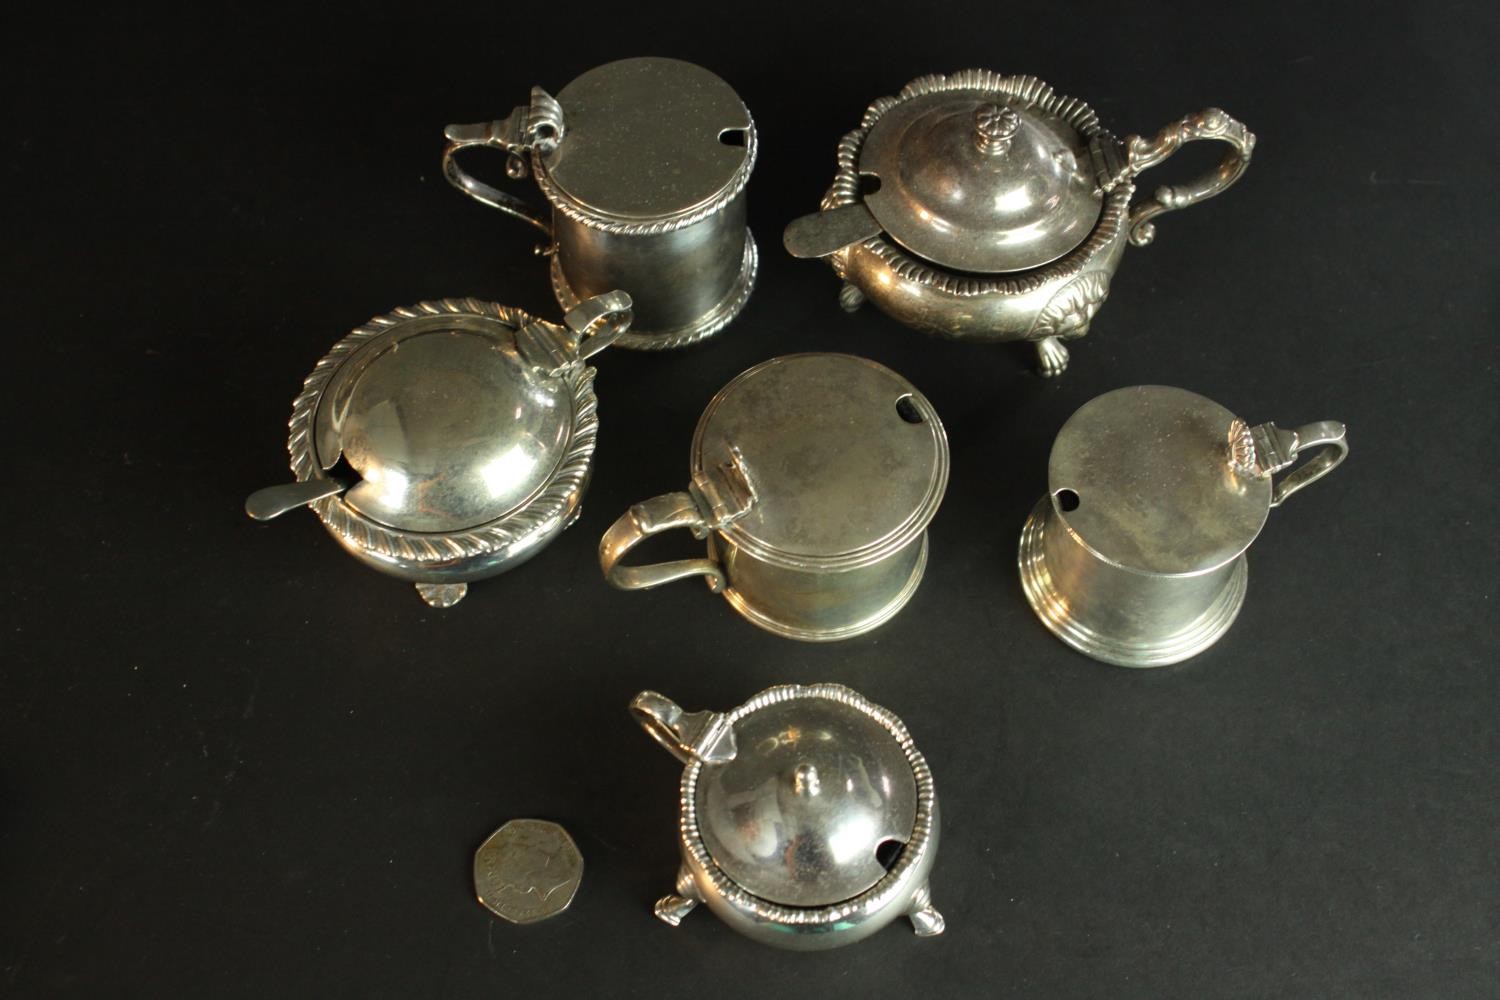 Six 19th and 20th century sterling silver hinged lid mustard pots, various designs, makers and assay - Image 2 of 15